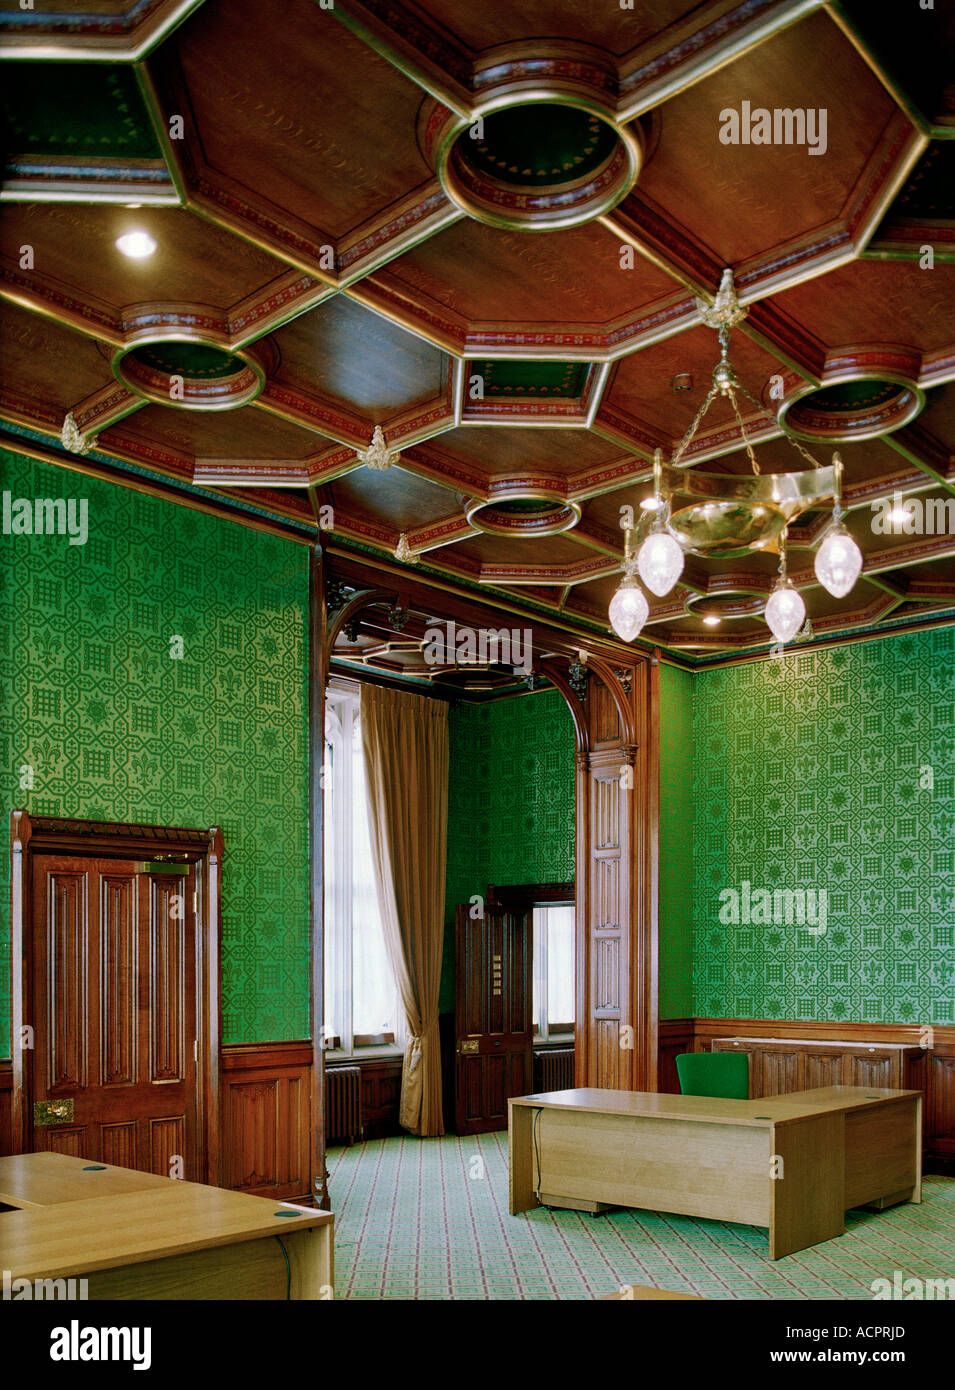 Wood panelled ceiling at the refurbished offices at the Palace of Westminster - The Houses of Parliament Stock Photo